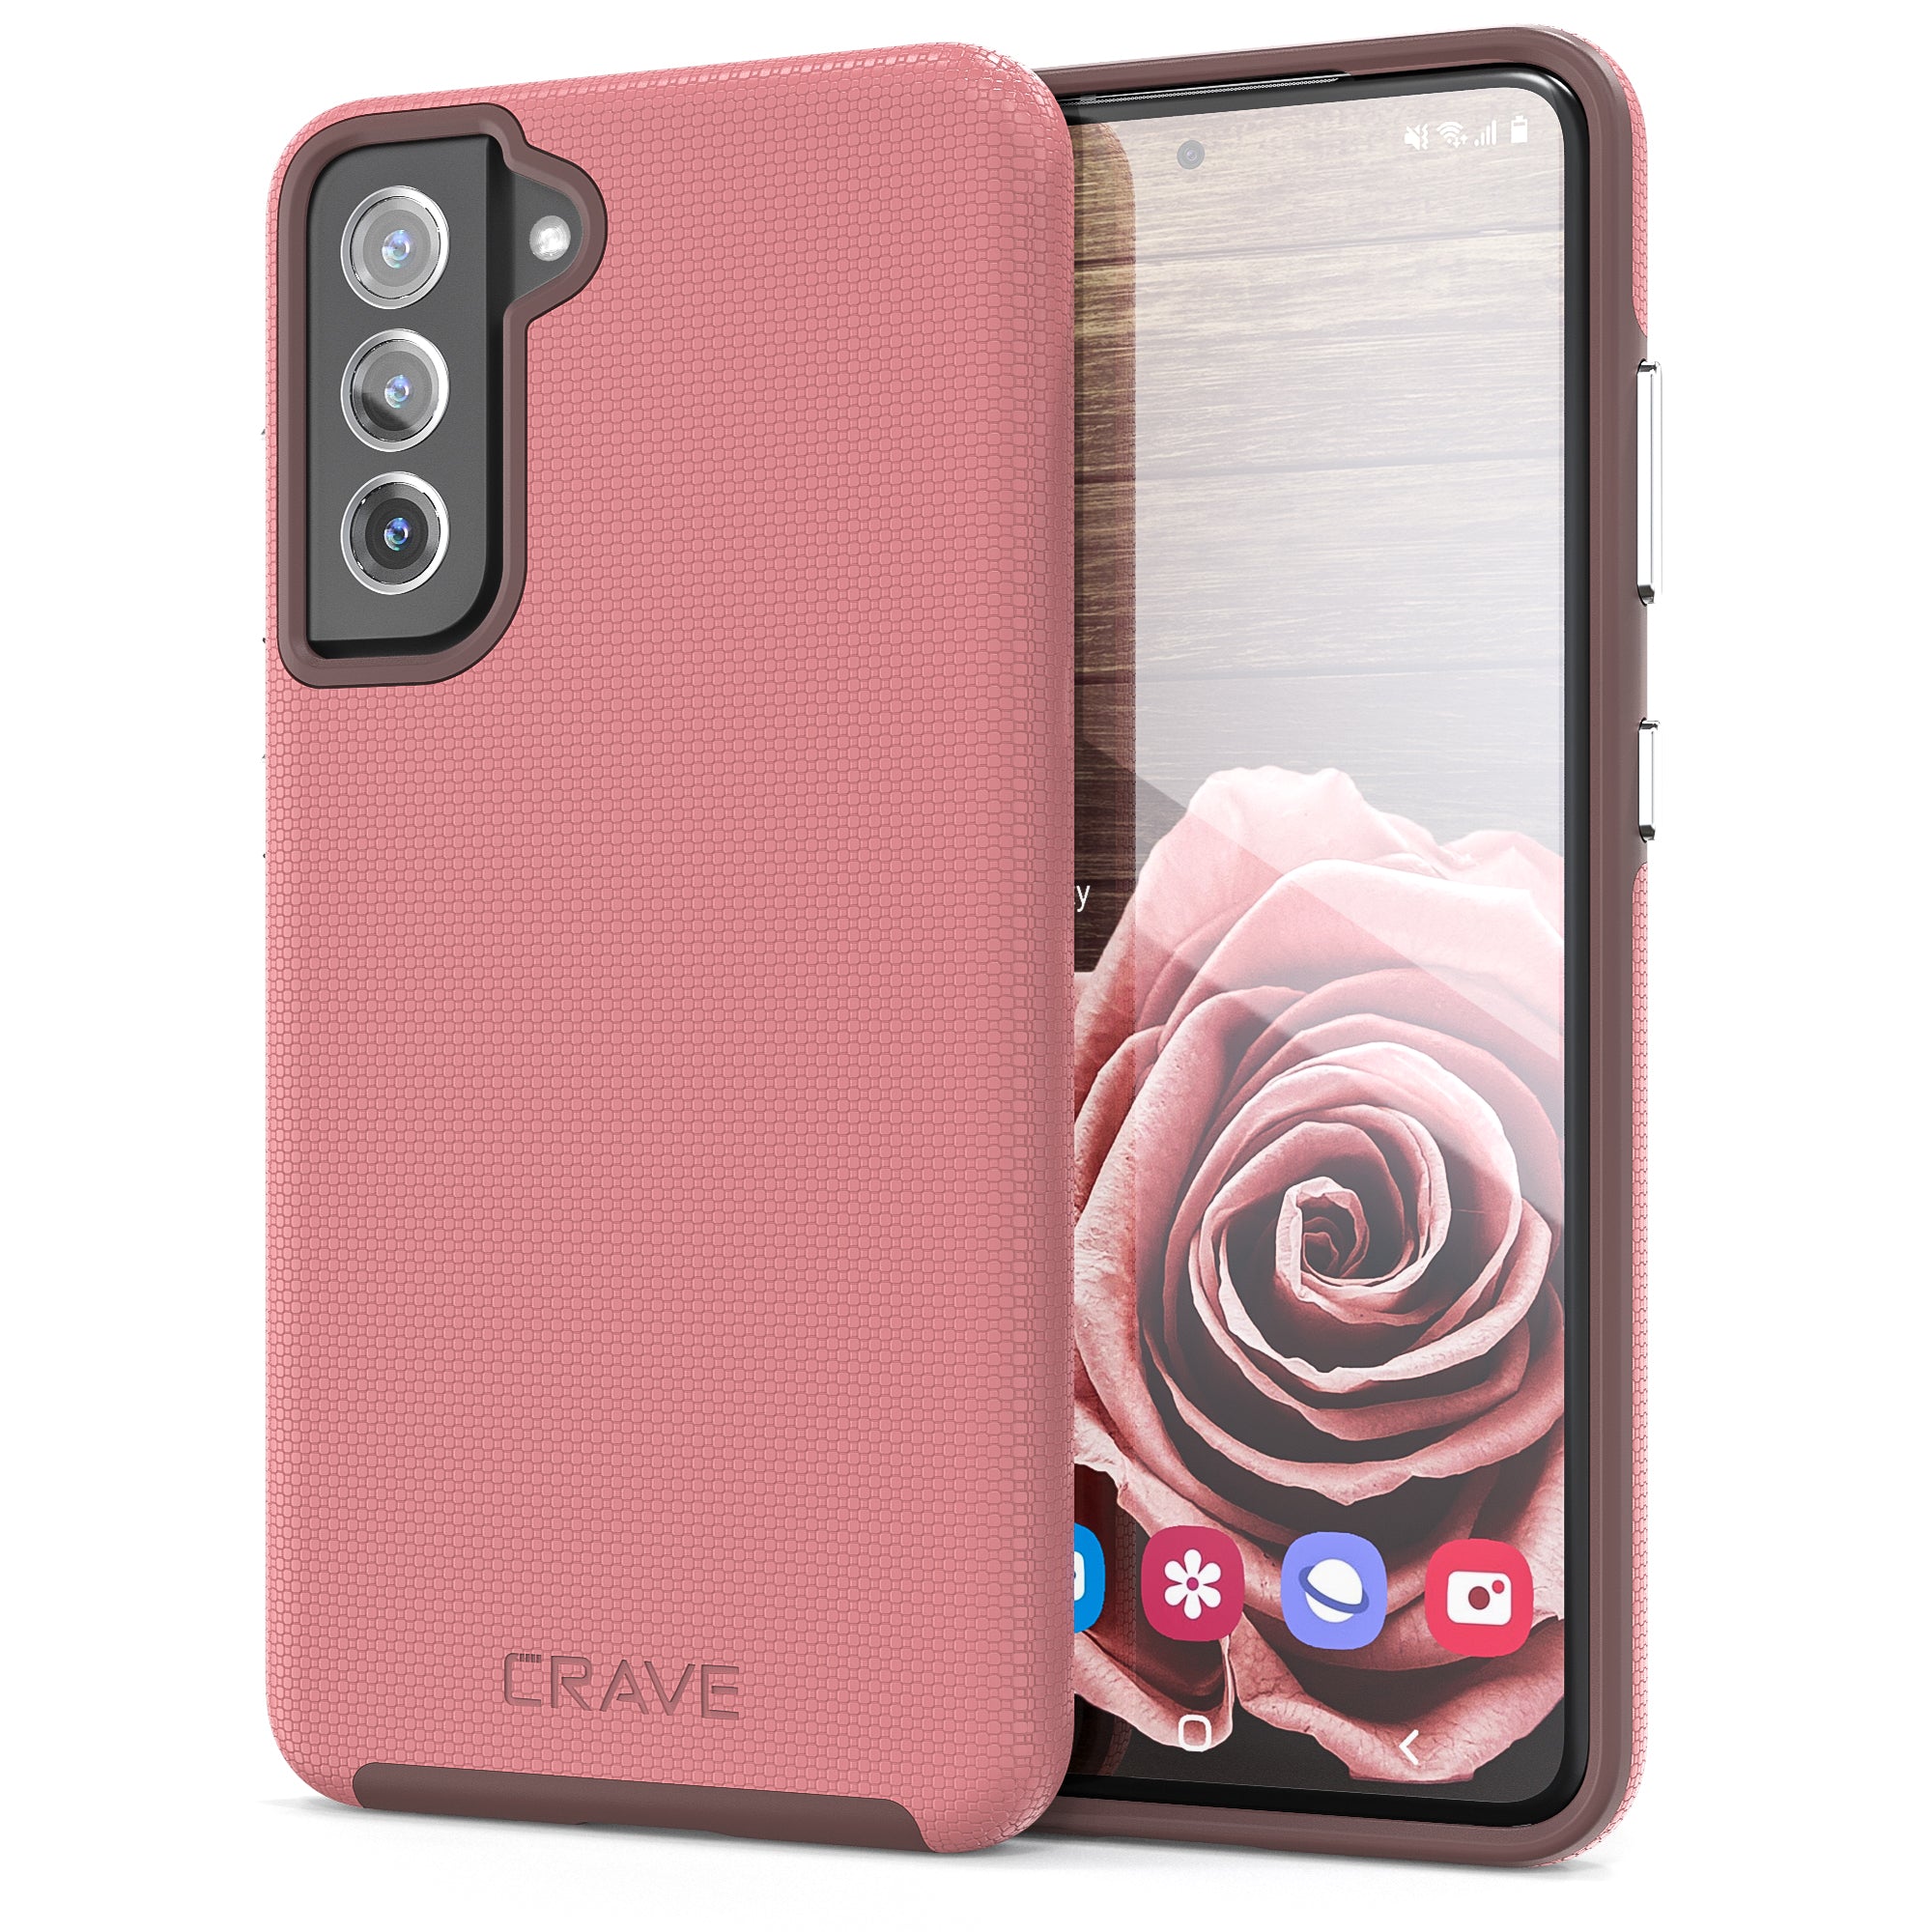  Crave Dual Guard for iPhone 13 Pro, Shockproof